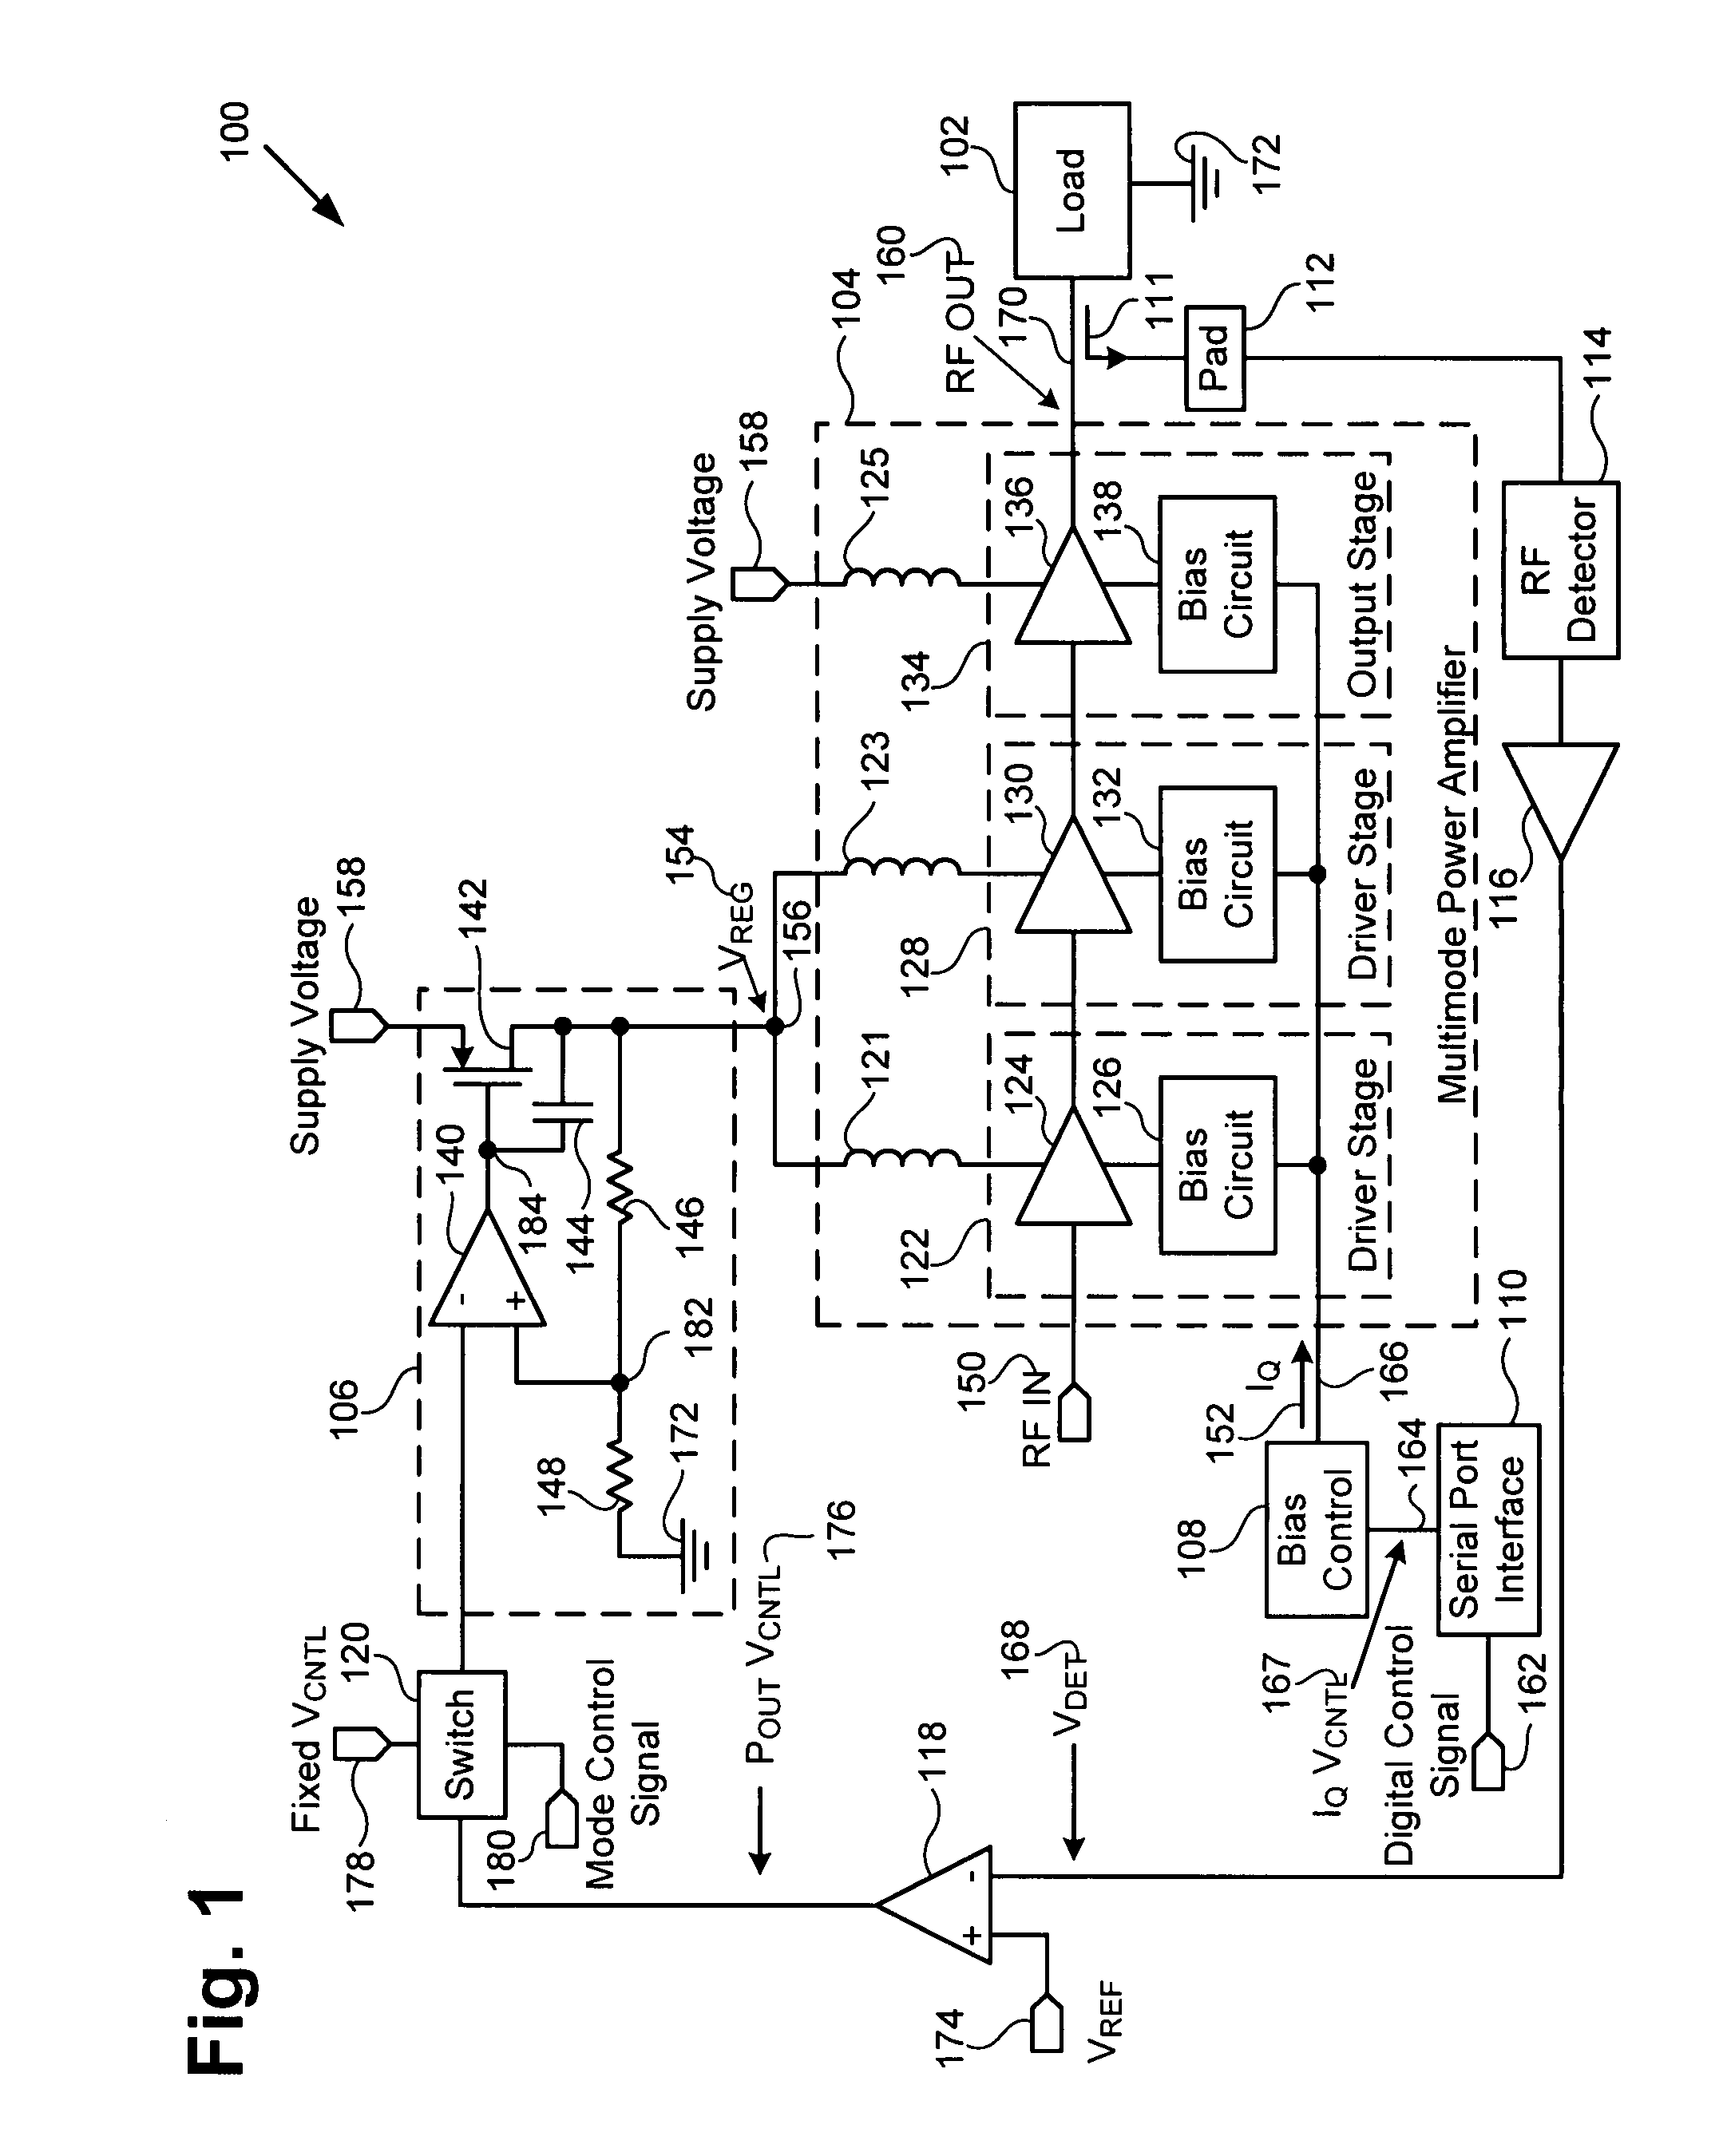 Multimode amplifier for operation in linear and saturated modes